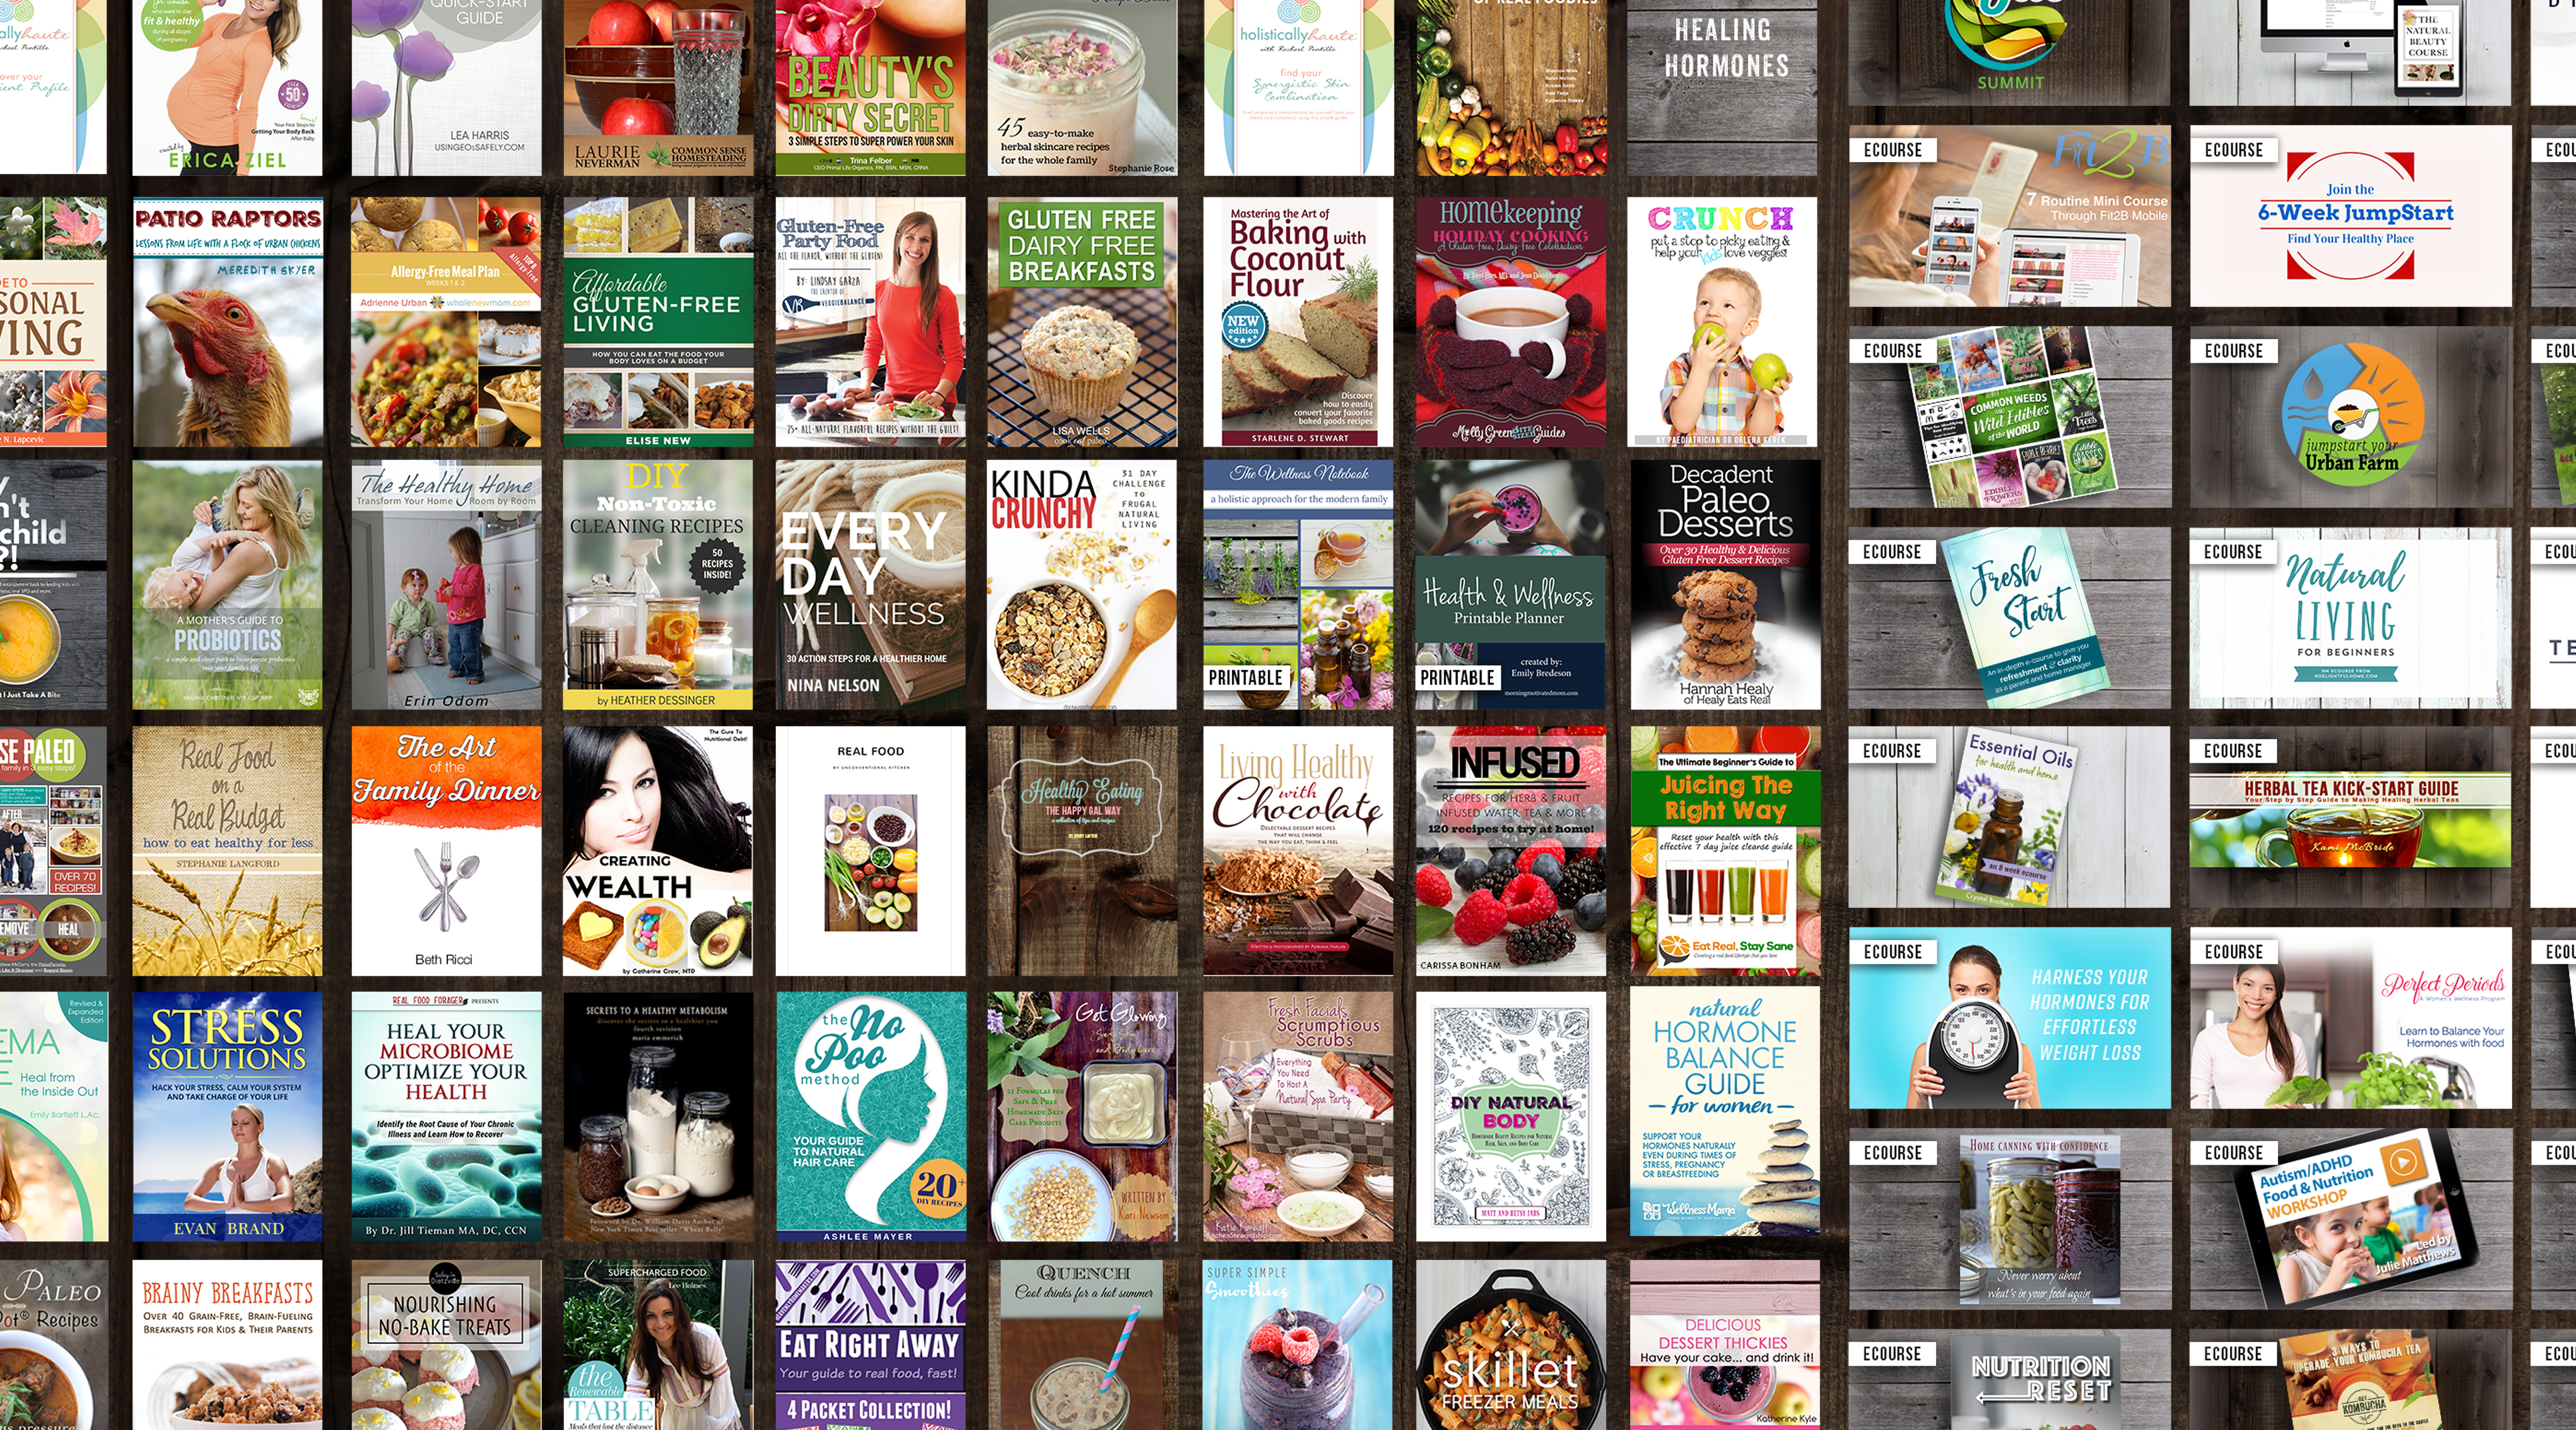 Once A Year Book Bundle The Ultimate Healthy Living bundle